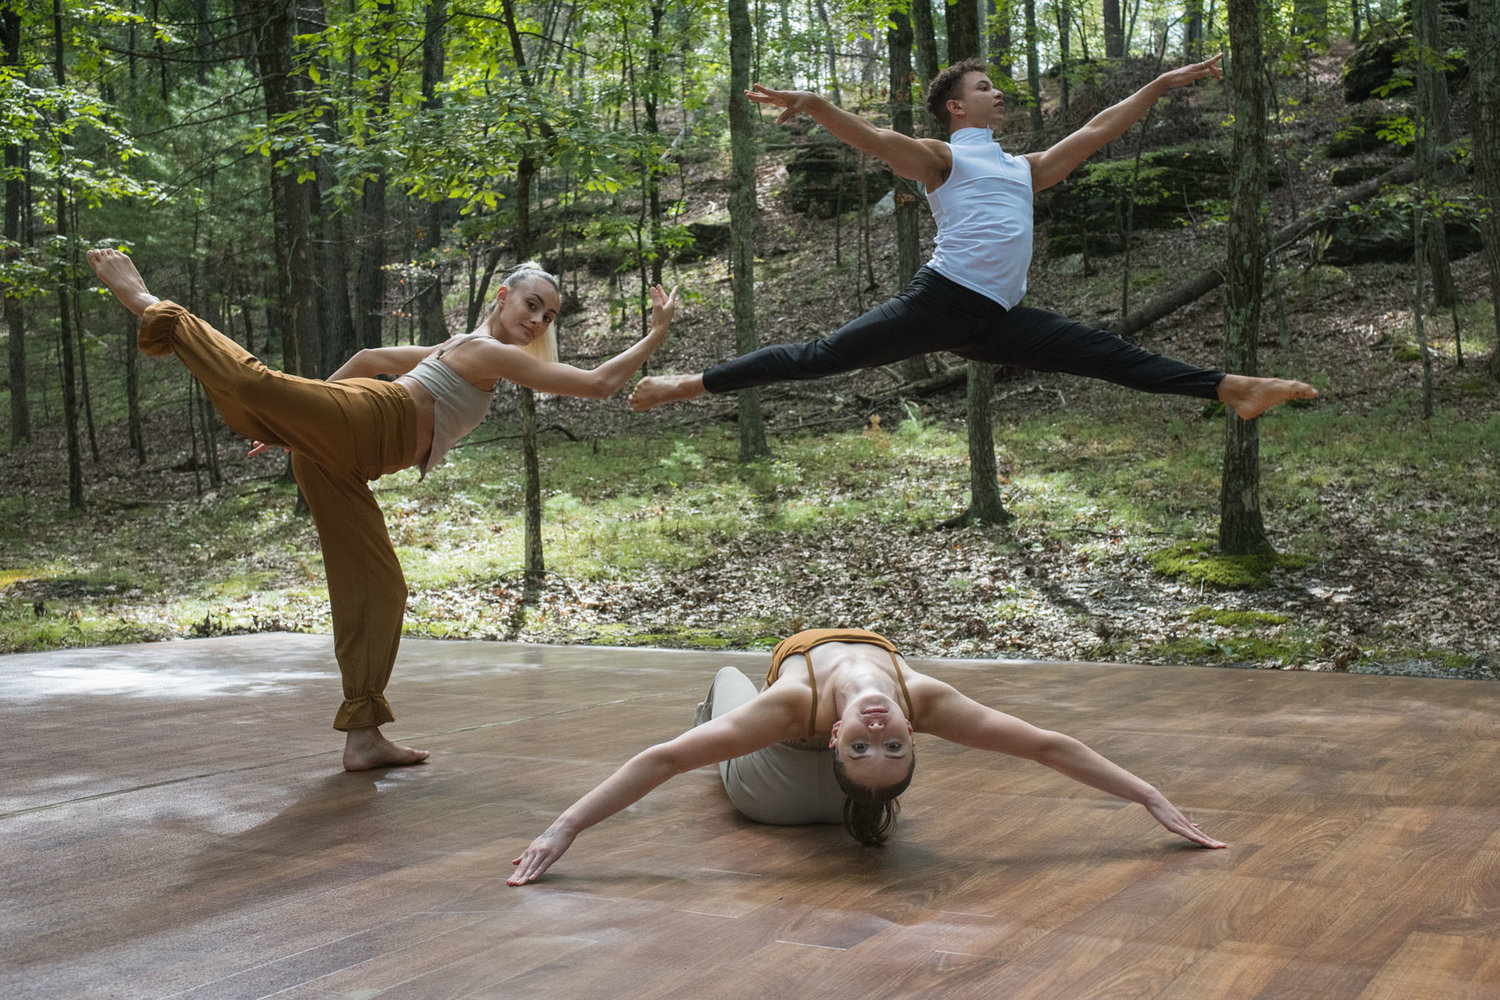 Johanna LjungQvist-Brinson, who lives near Milford, PA, will premiere her dance company's new works, as well as older works, in “An Evening with Hanna Q,” at Abrons Arts Center in New York City.